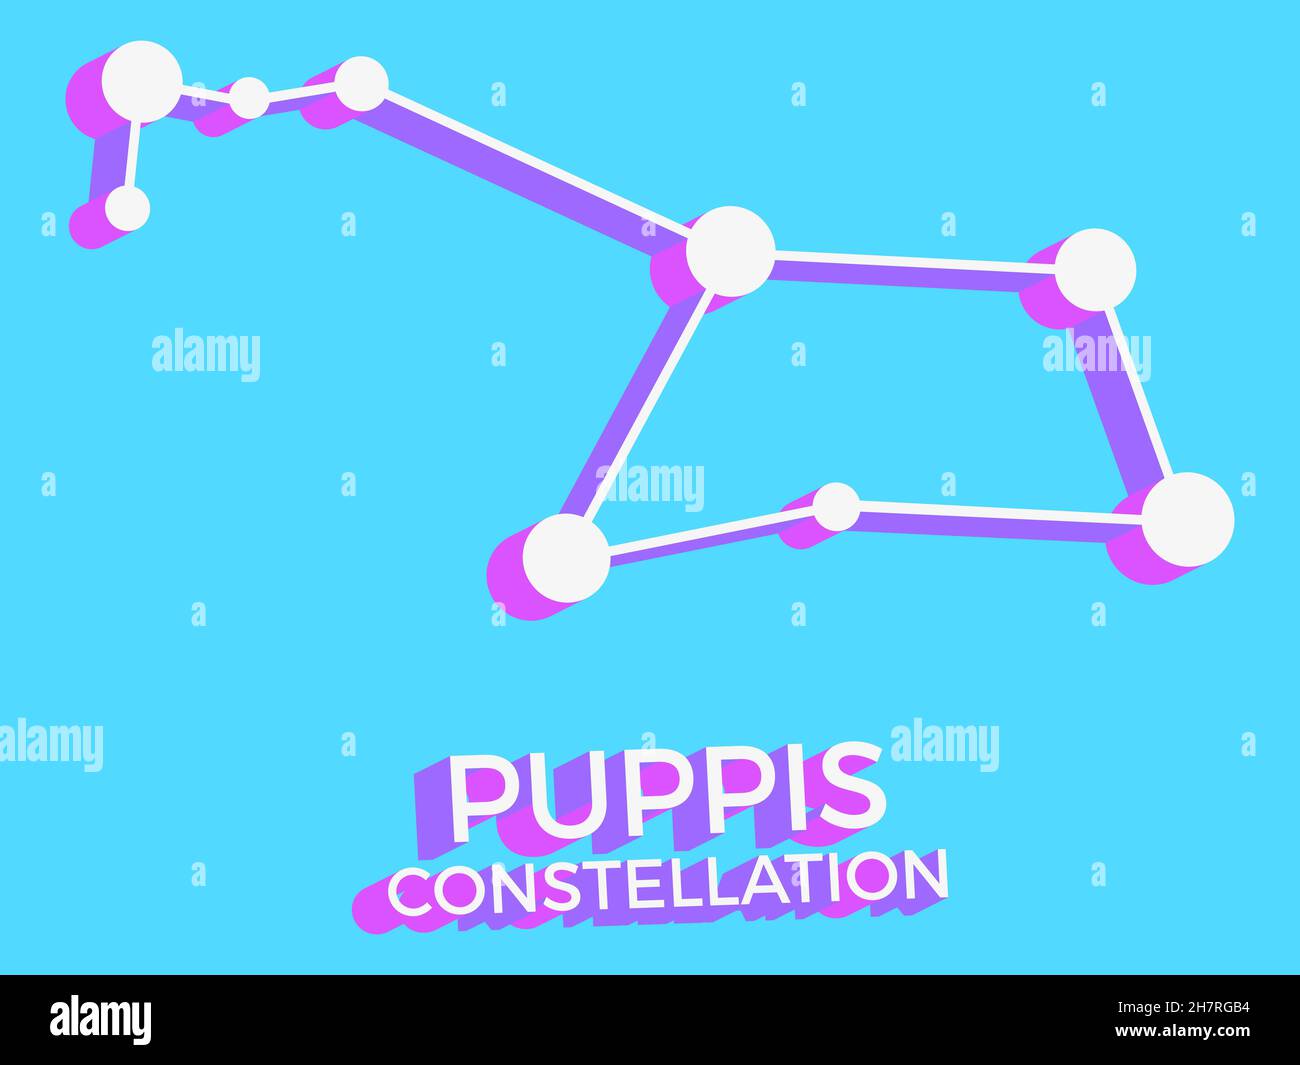 Puppis constellation 3d symbol. Constellation icon in isometric style on blue background. Cluster of stars and galaxies. Vector illustration Stock Vector